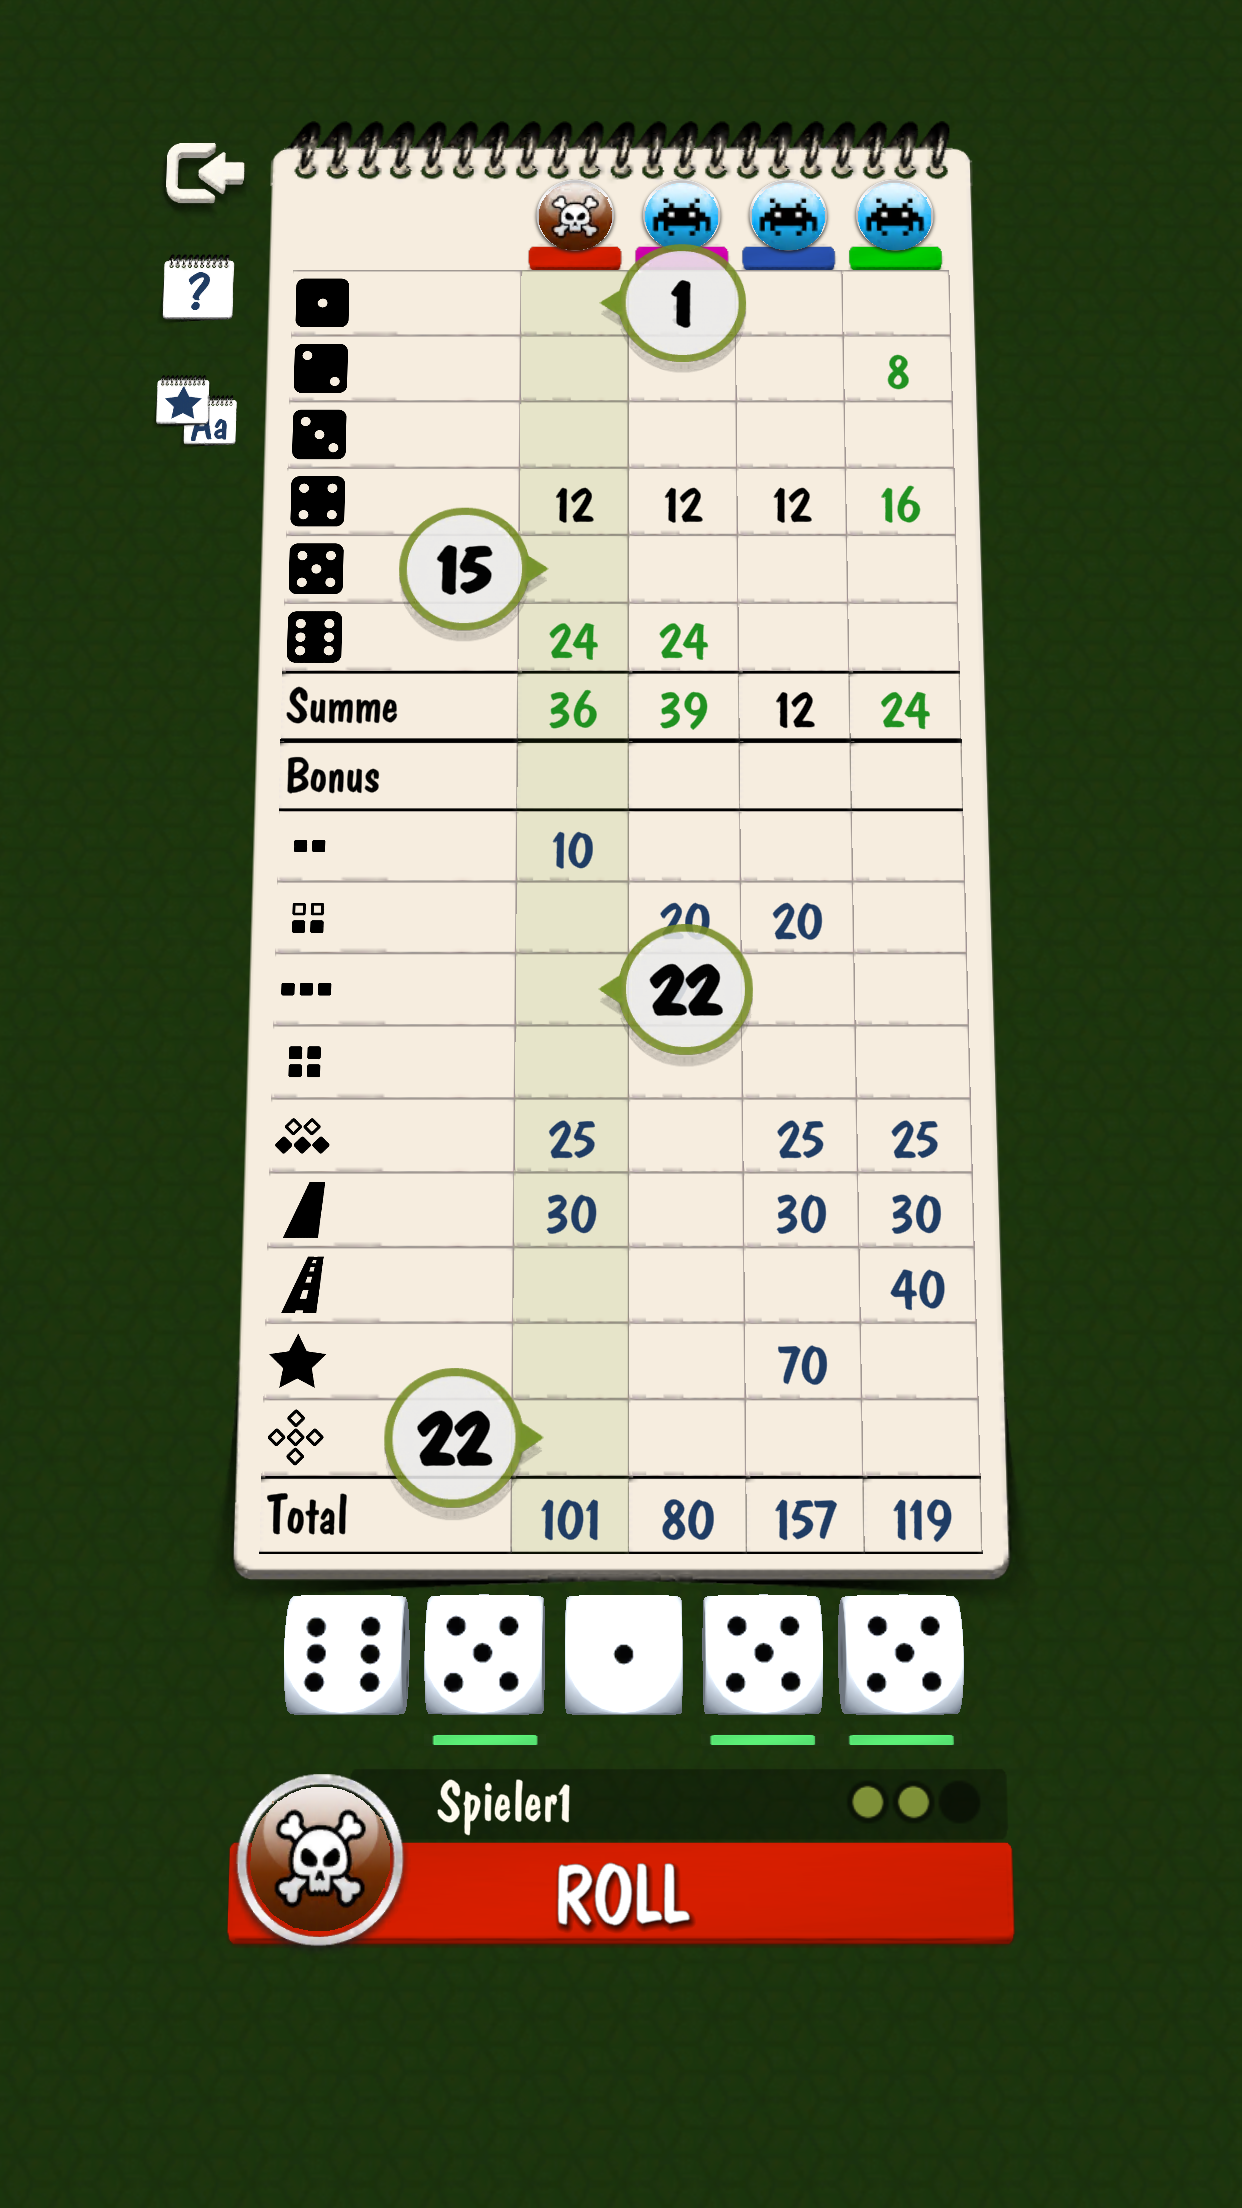 Yatzy - Fun Classic Dice Game - Apps on Google Play